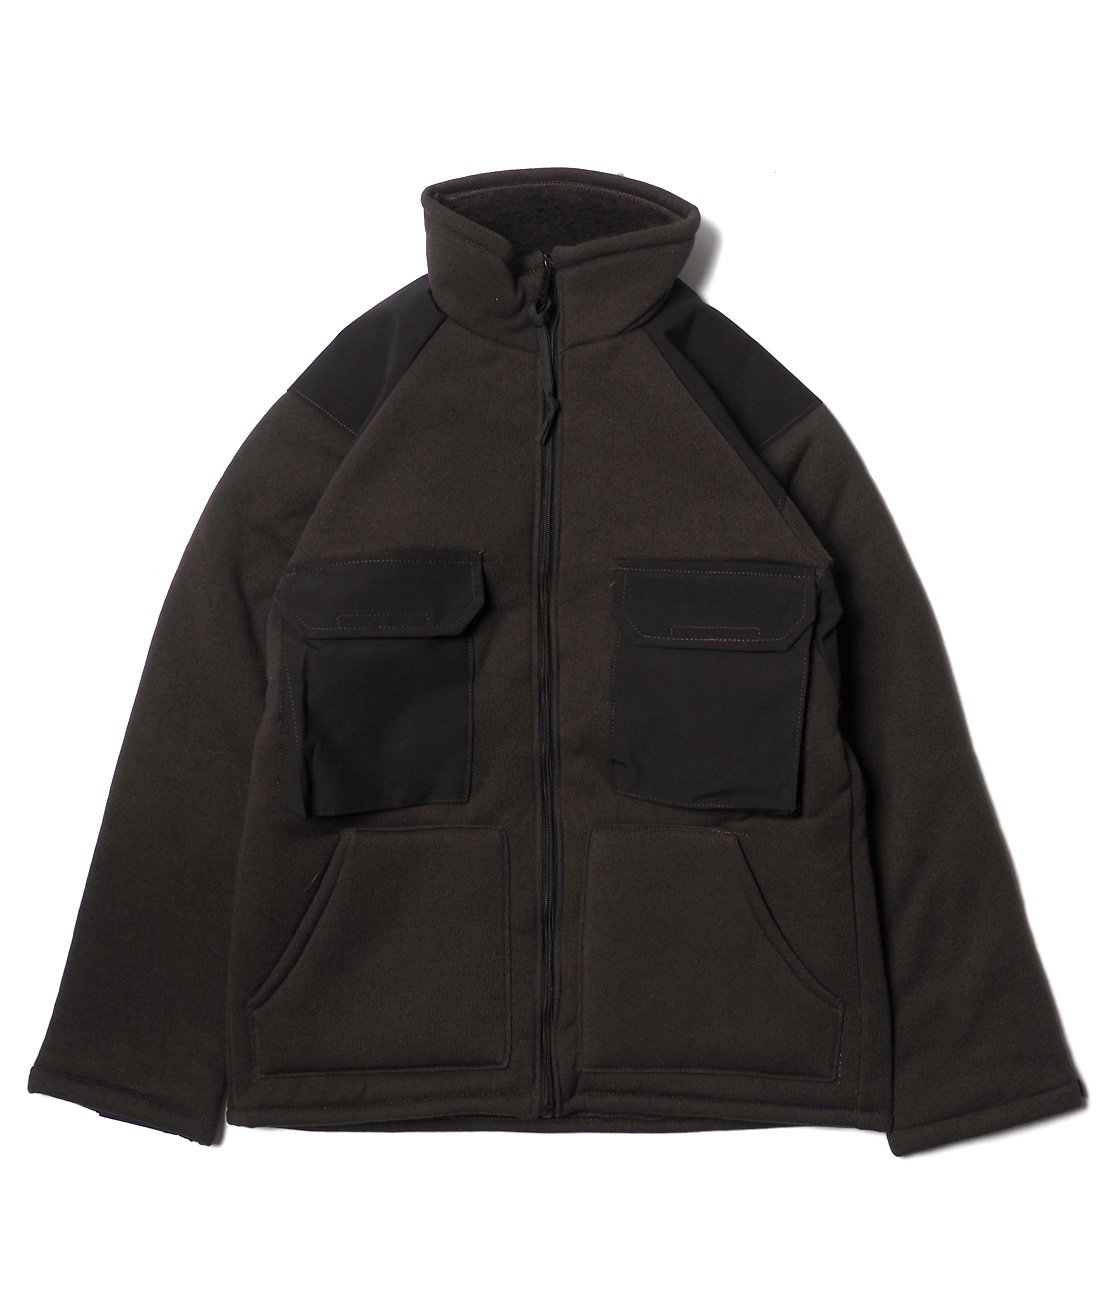 DEAD STOCK】U.S.ARMY ECWCS COLD WEATHER FLEECE JACKET 米軍 実物 